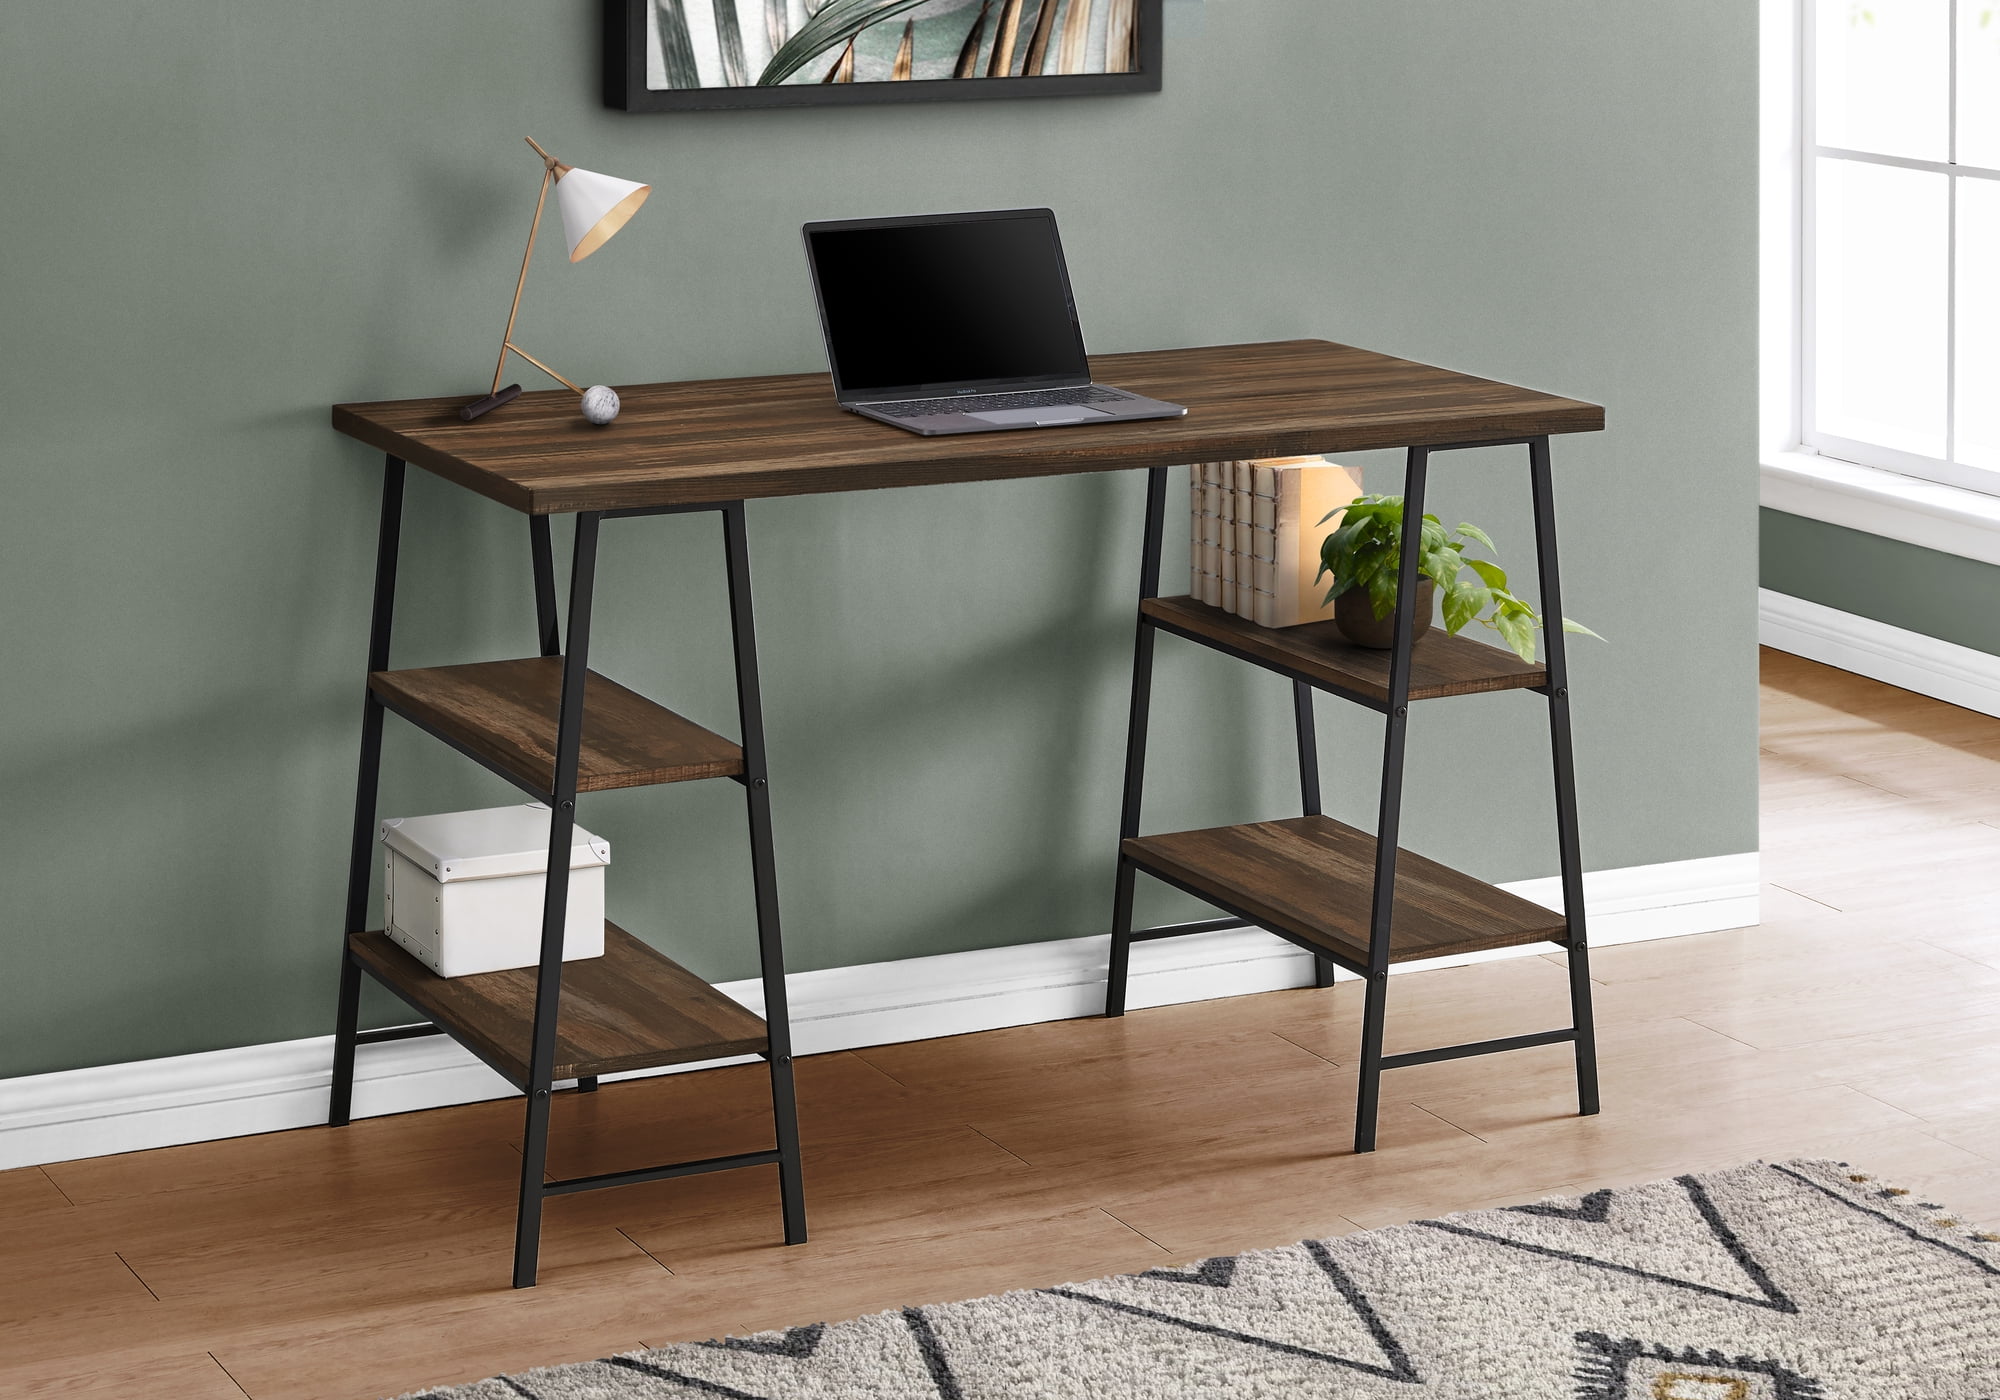 DESK Details about   RETAIL BROWN WOOD DISPLAY TABLE 